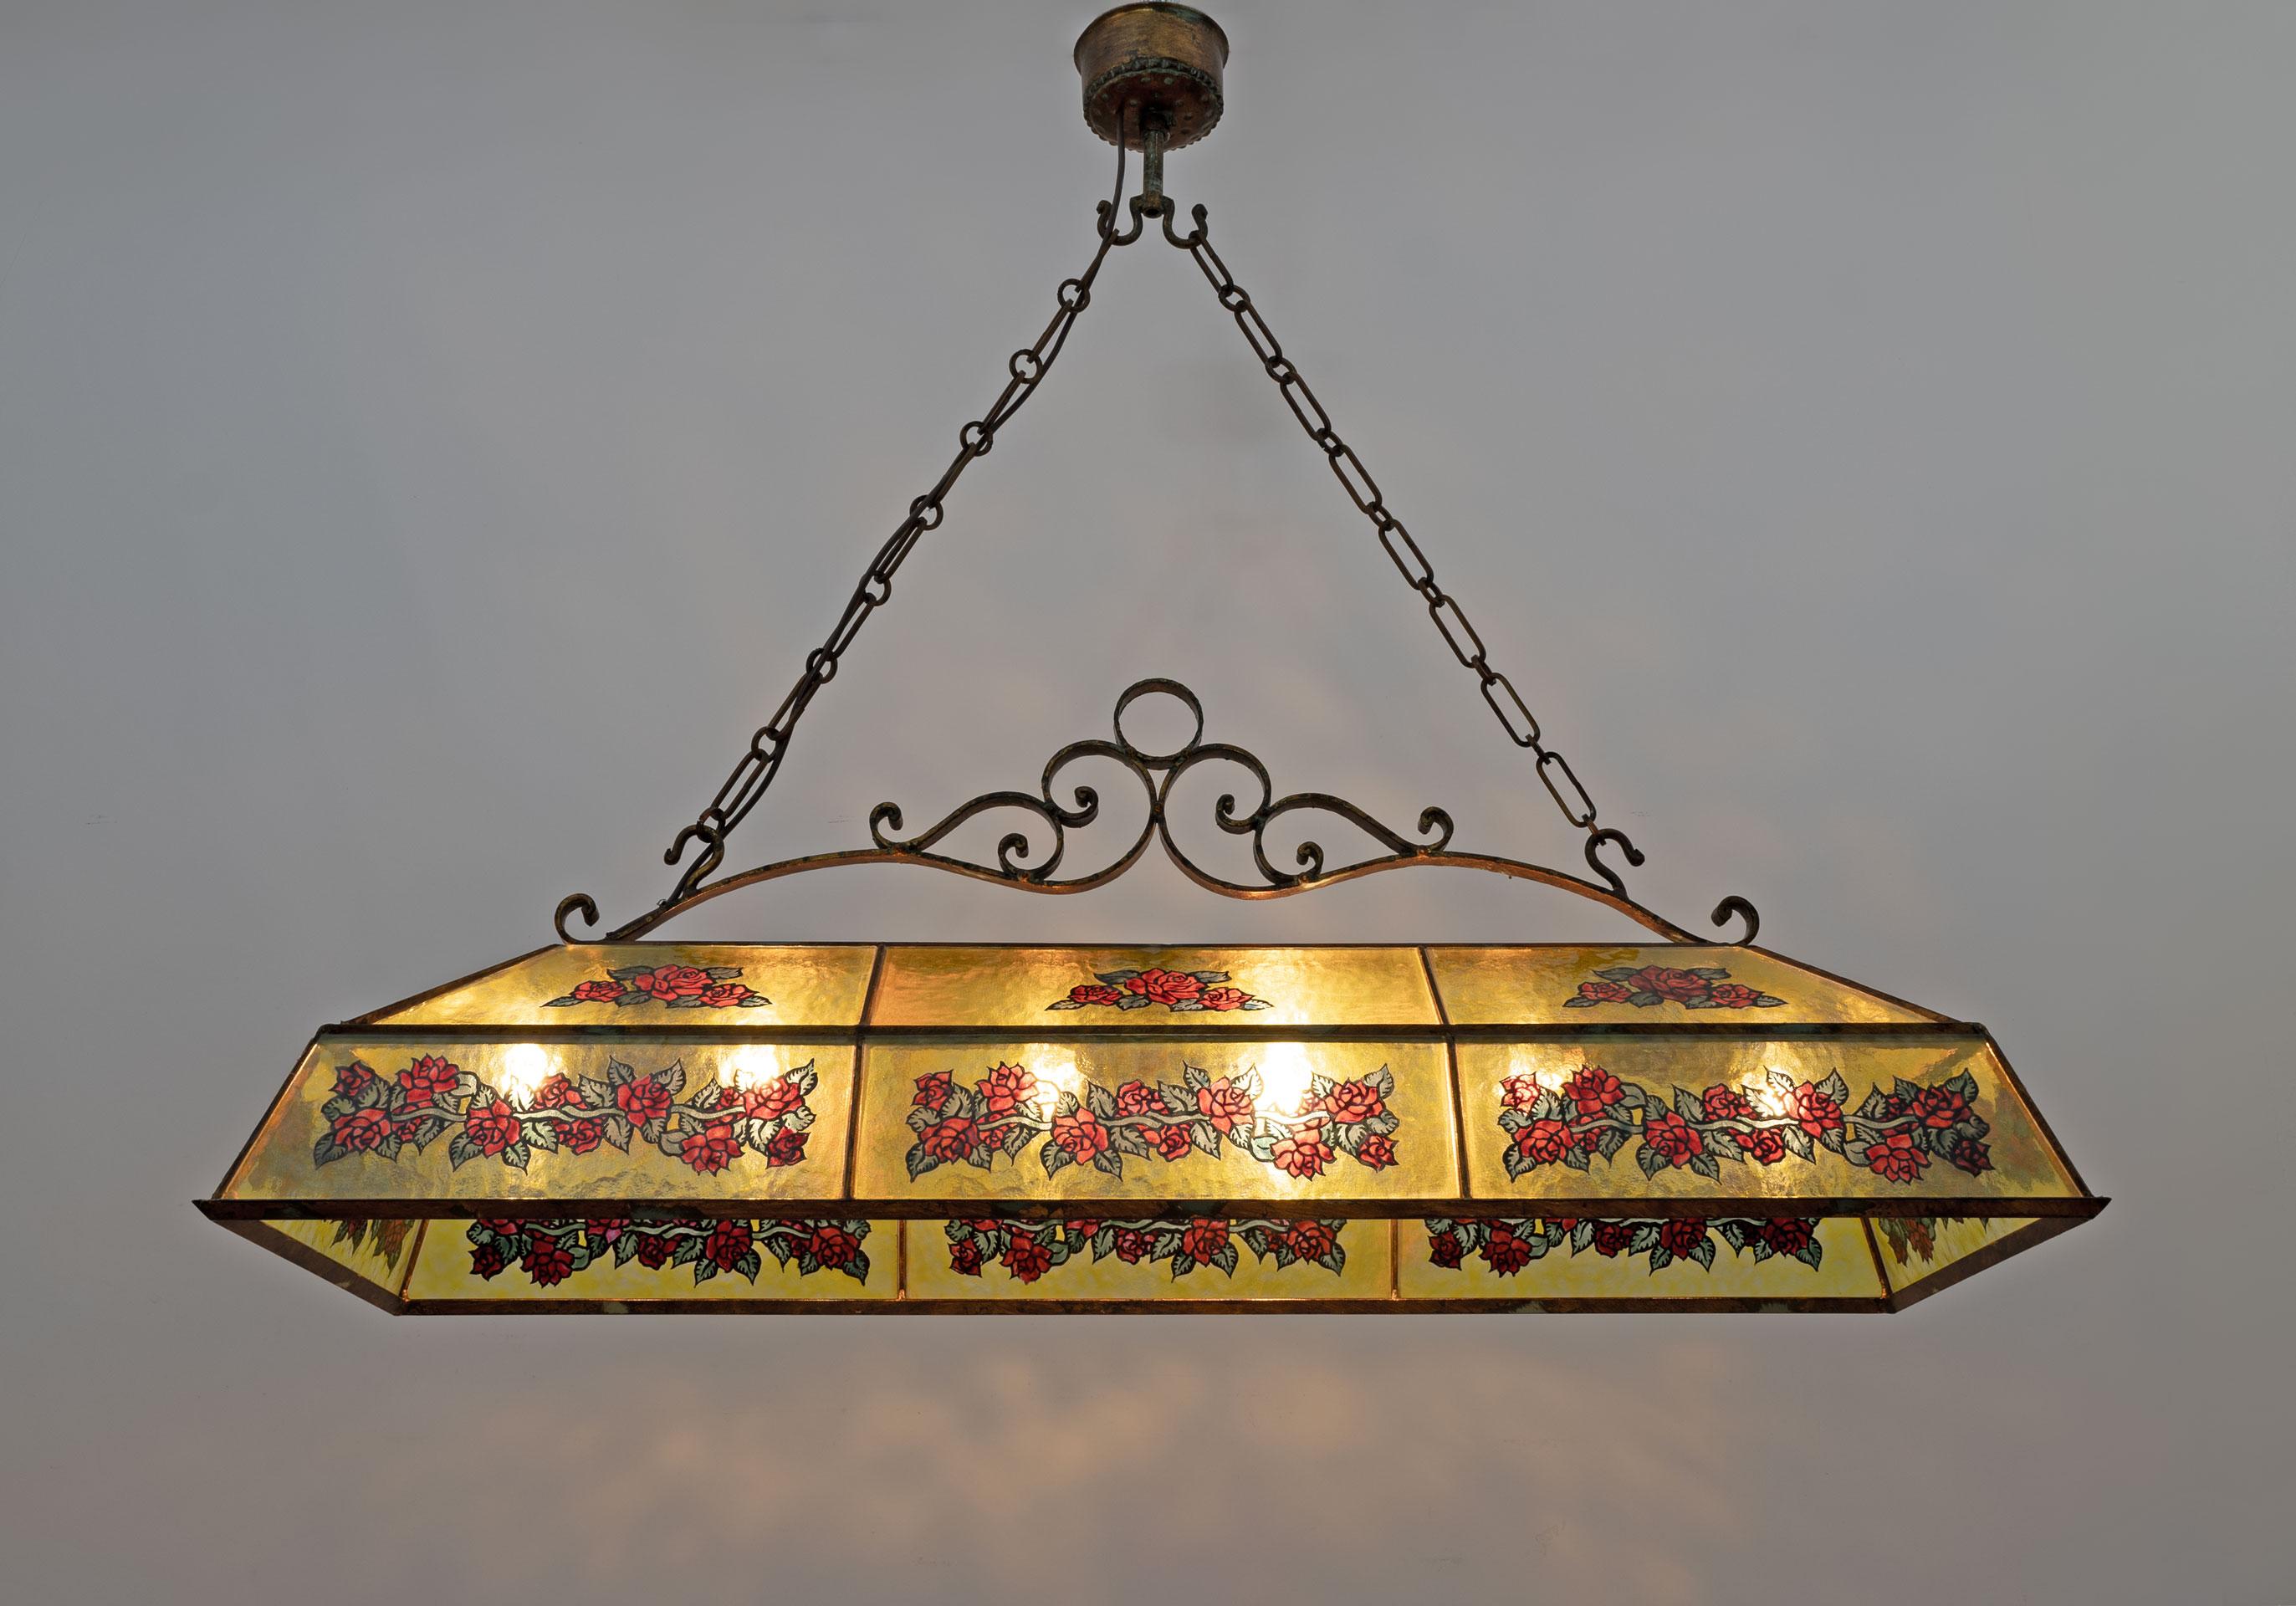 Italian rustic style chandelier in wrought iron and glass with hand-painted decorations. The chandelier is rectangular in shape suitable for illuminating a rectangular dining table or a rustic style peninsula. Six lamp holders for E27 or E26 bulbs